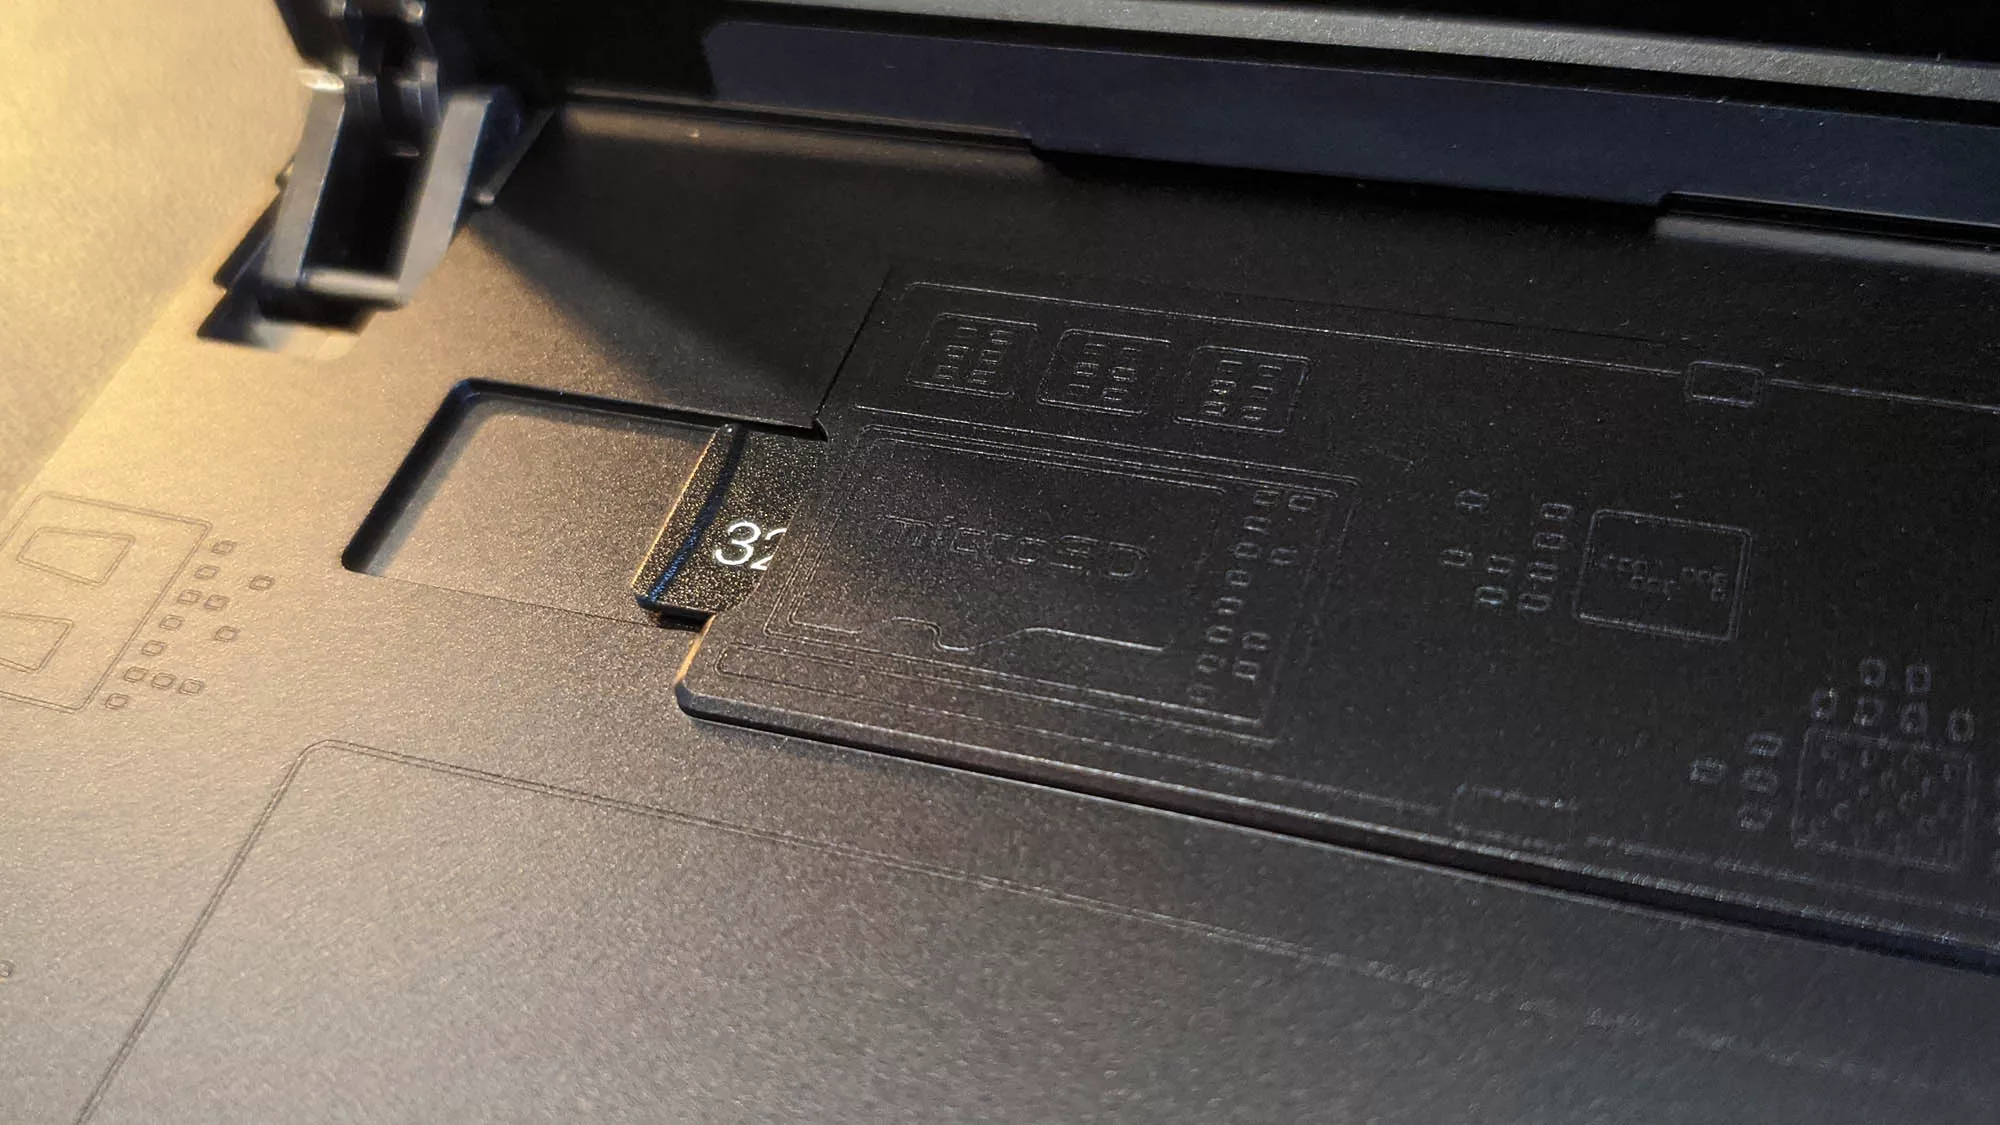 A photo of a microSD card inserted into the Flow Z13 tablet.